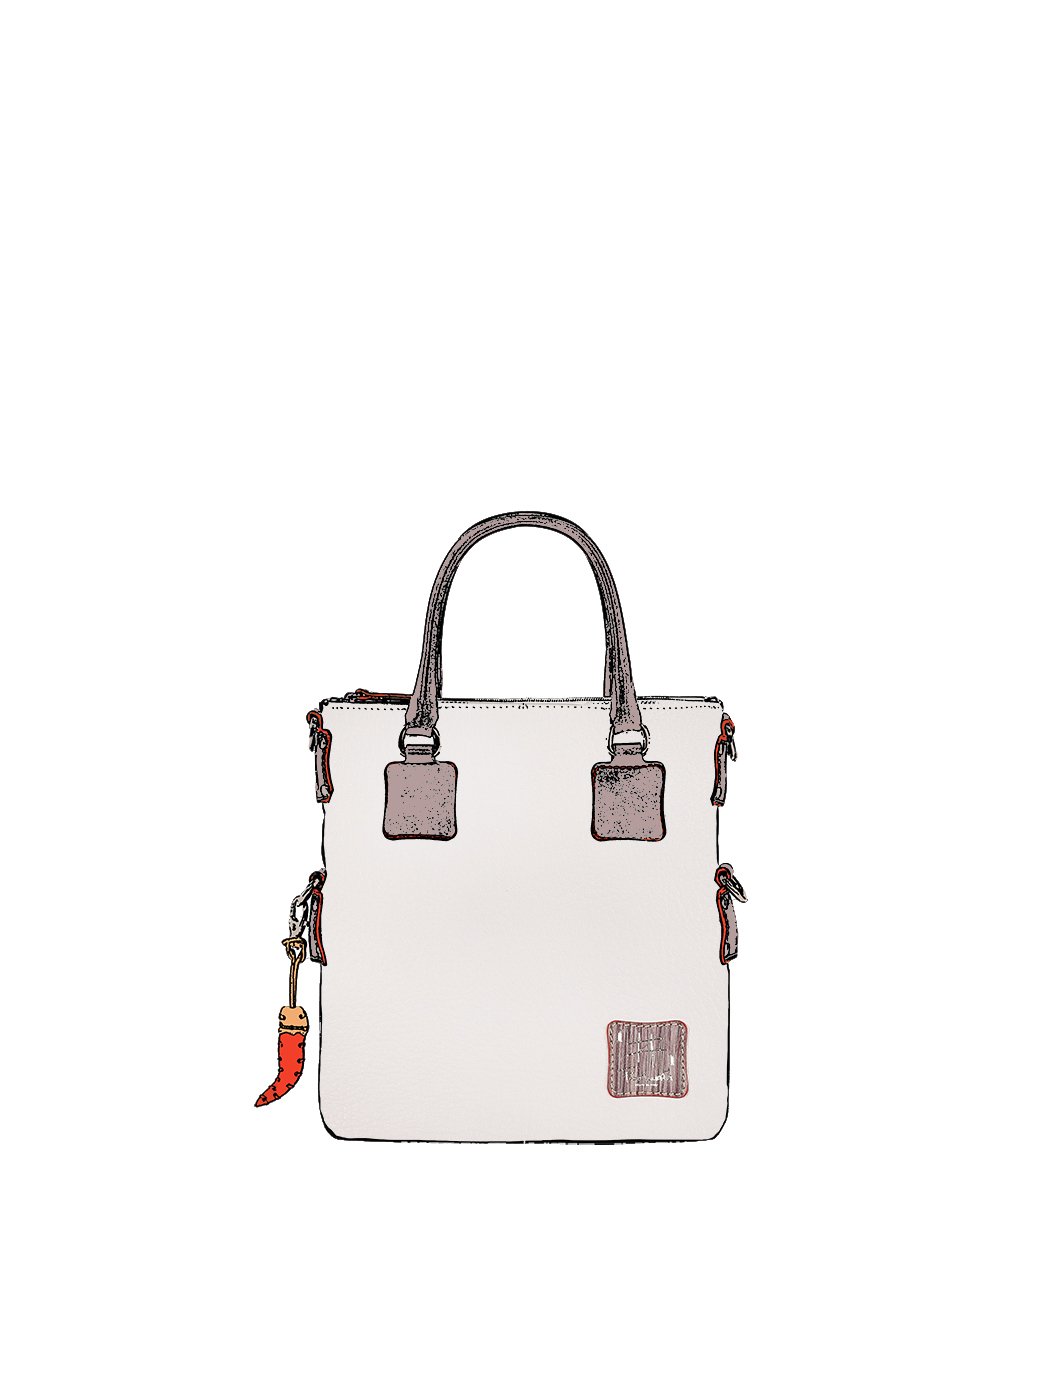 Small Handbag - Leather Tote Bag in White